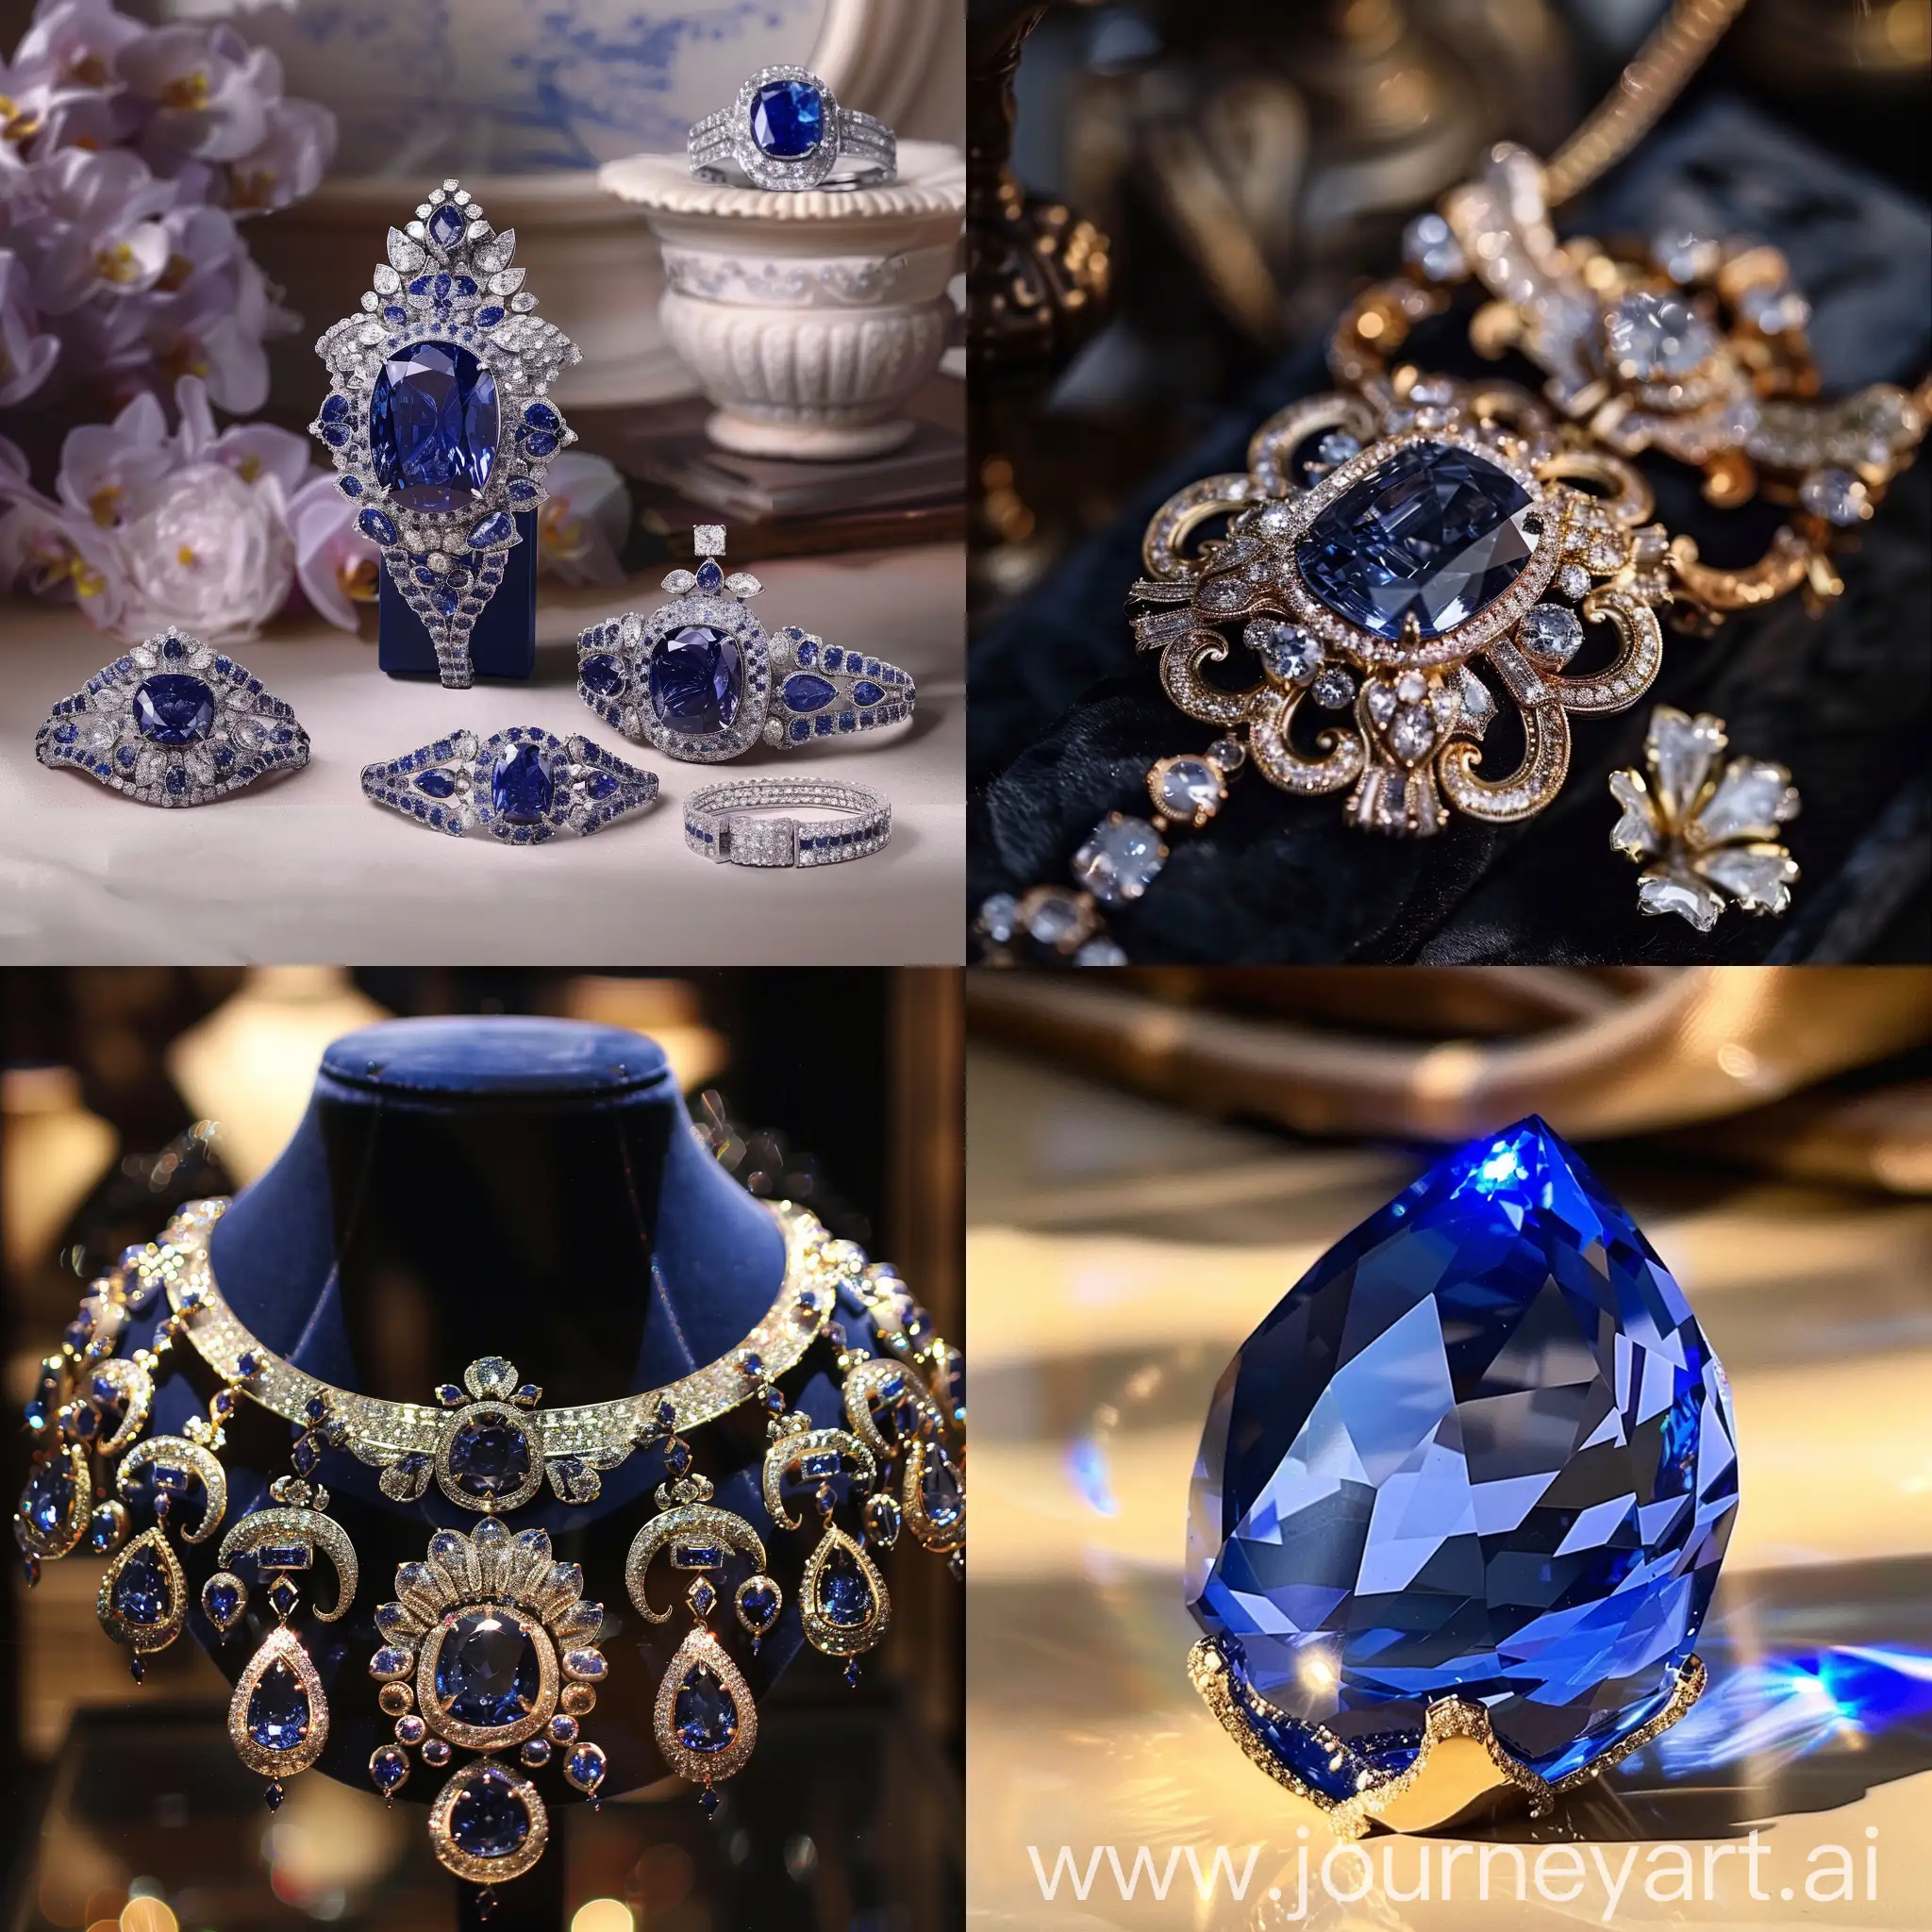 Exquisite-Luxury-Sapphire-Crystal-Pieces-Displayed